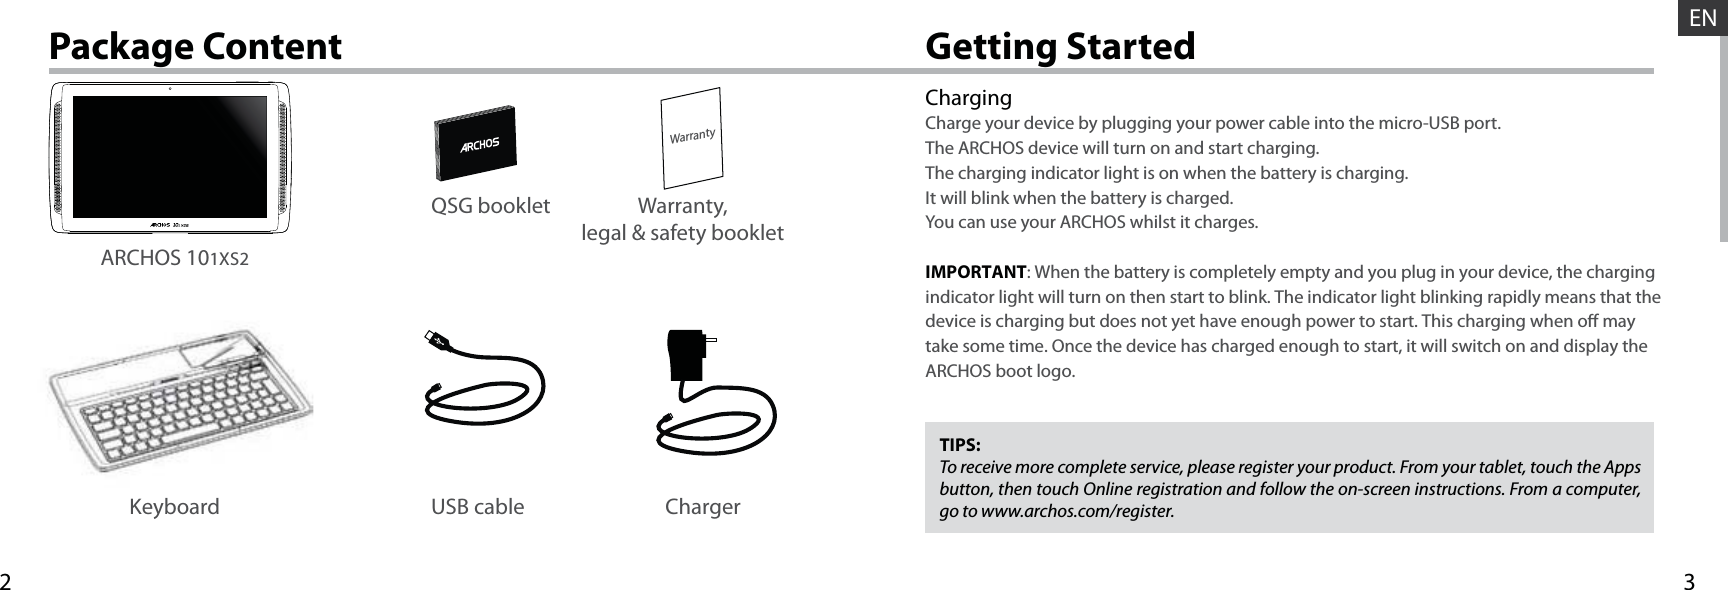 32WarrantyENUSB cable ChargerQSG booklet Warranty,legal &amp; safety bookletGetting StartedPackage ContentChargingCharge your device by plugging your power cable into the micro-USB port.The ARCHOS device will turn on and start charging. The charging indicator light is on when the battery is charging. It will blink when the battery is charged. You can use your ARCHOS whilst it charges. IMPORTANT: When the battery is completely empty and you plug in your device, the charging indicator light will turn on then start to blink. The indicator light blinking rapidly means that the device is charging but does not yet have enough power to start. This charging when o may take some time. Once the device has charged enough to start, it will switch on and display the ARCHOS boot logo.TIPS:To receive more complete service, please register your product. From your tablet, touch the Apps button, then touch Online registration and follow the on-screen instructions. From a computer, go to www.archos.com/register.ARCHOS 101XS2Keyboard